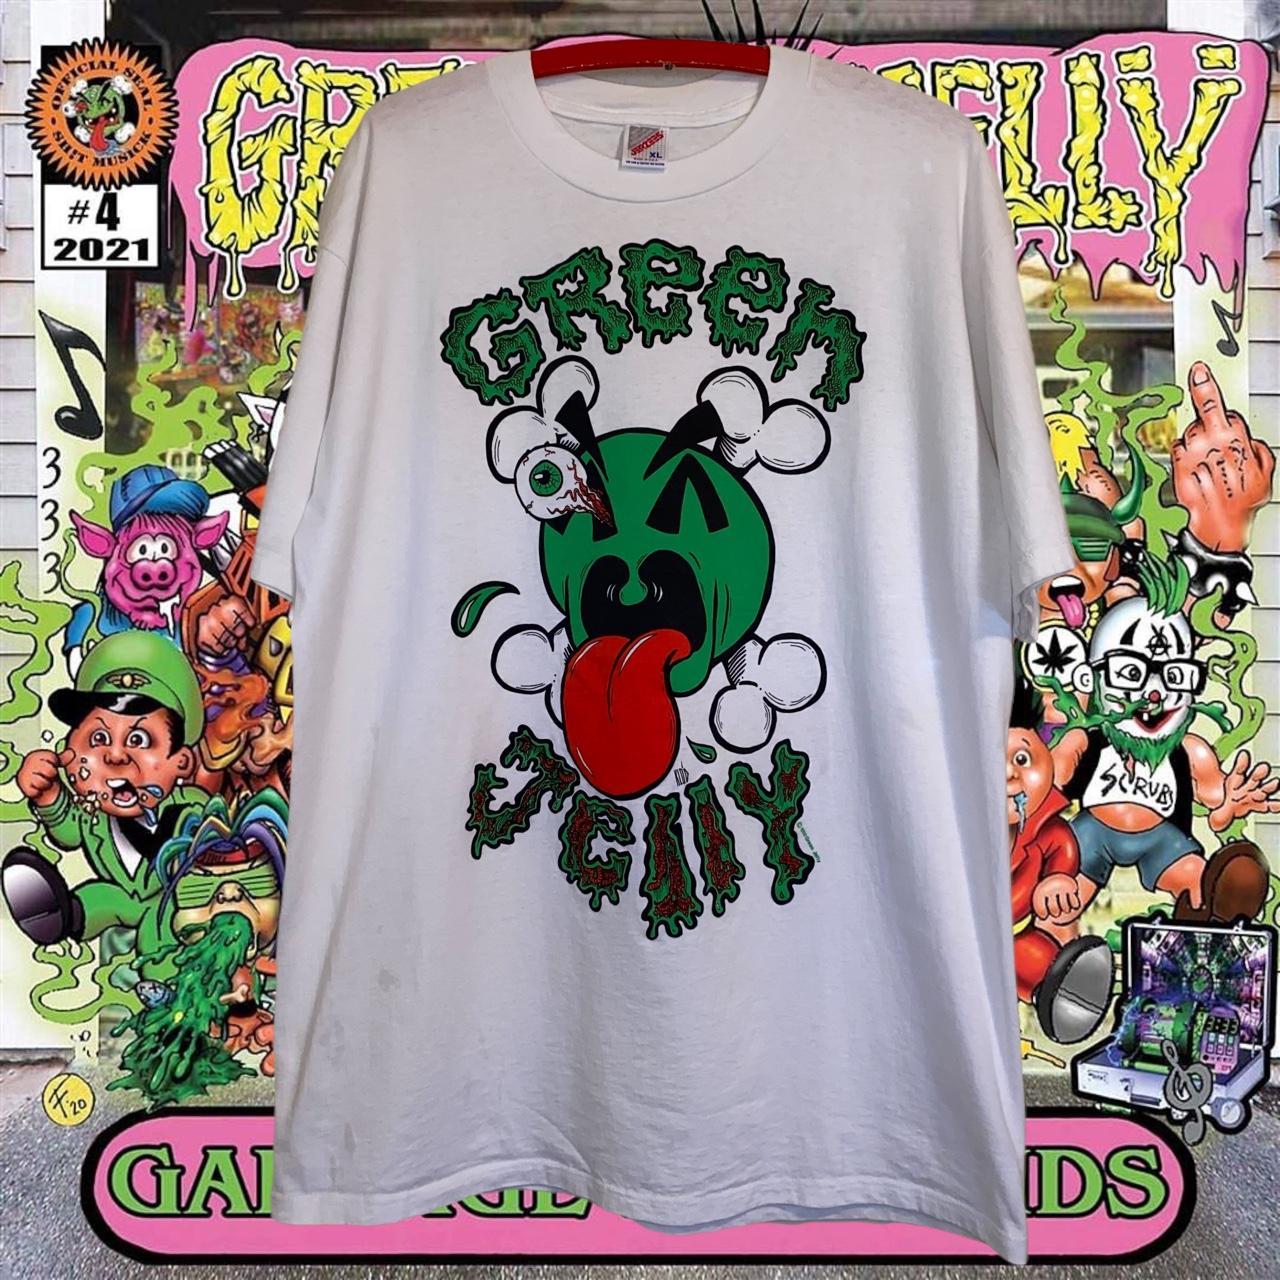 Vintage 1992 Green Jelly/Green Jellö T-Shirt, Tagged...